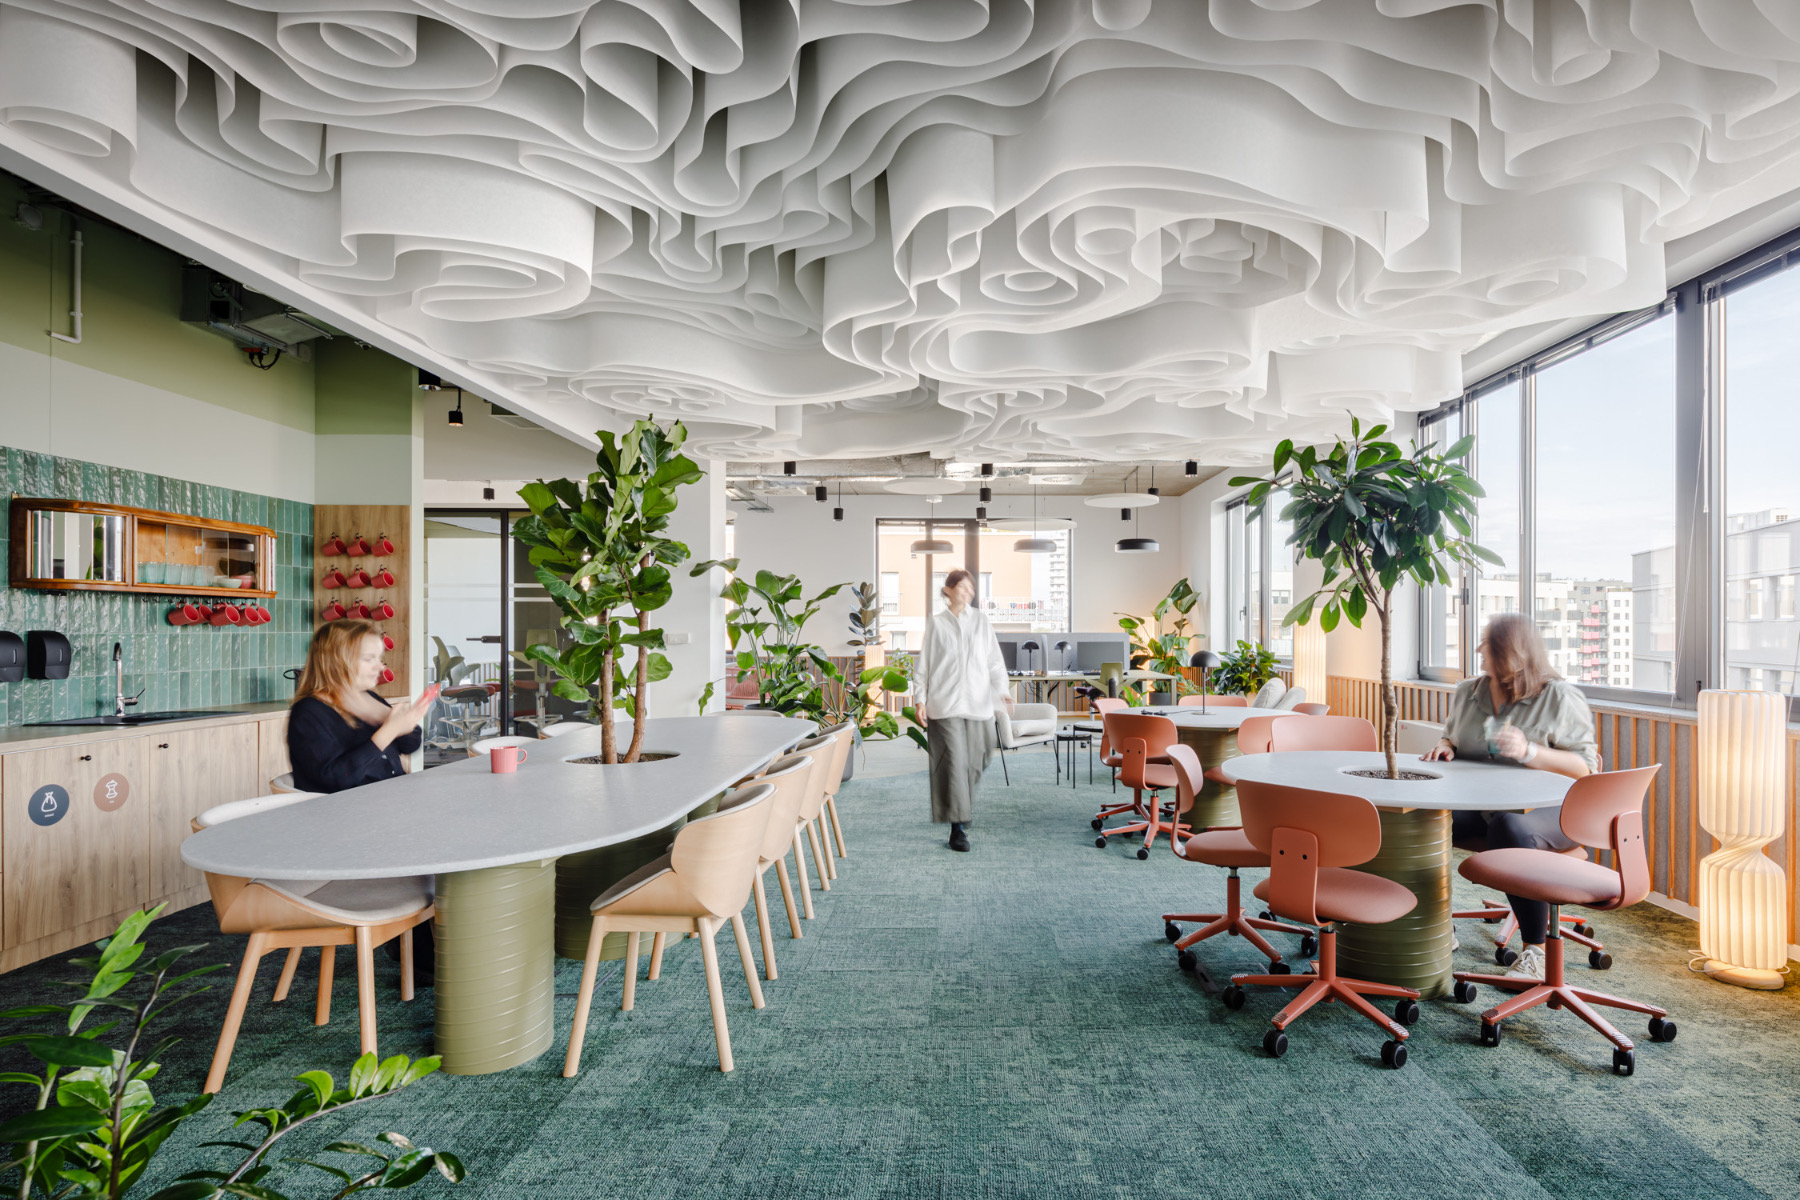 A Look Inside Private Energy Company Offices in Wroclaw